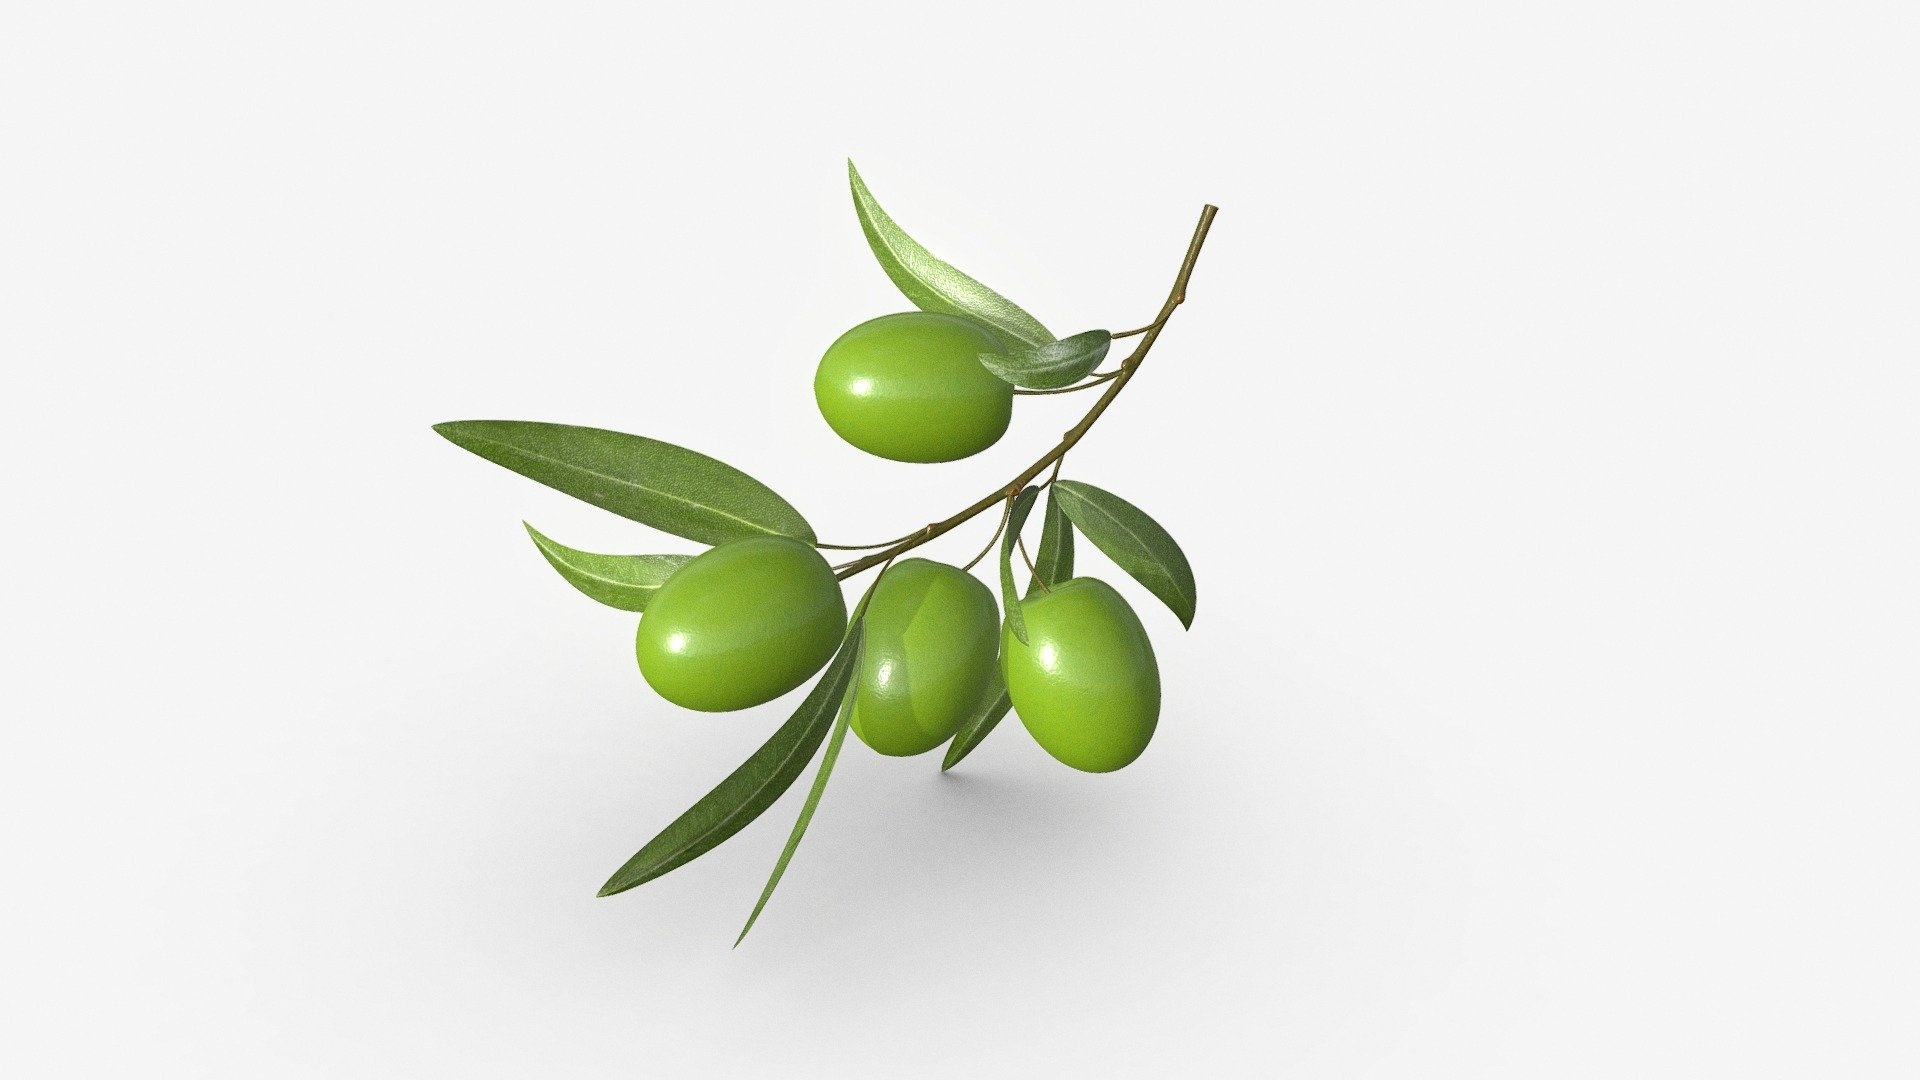 Olive: A fruit, coming from the Olea europea tree, Branch, Evergreen. 1920x1080 Full HD Background.